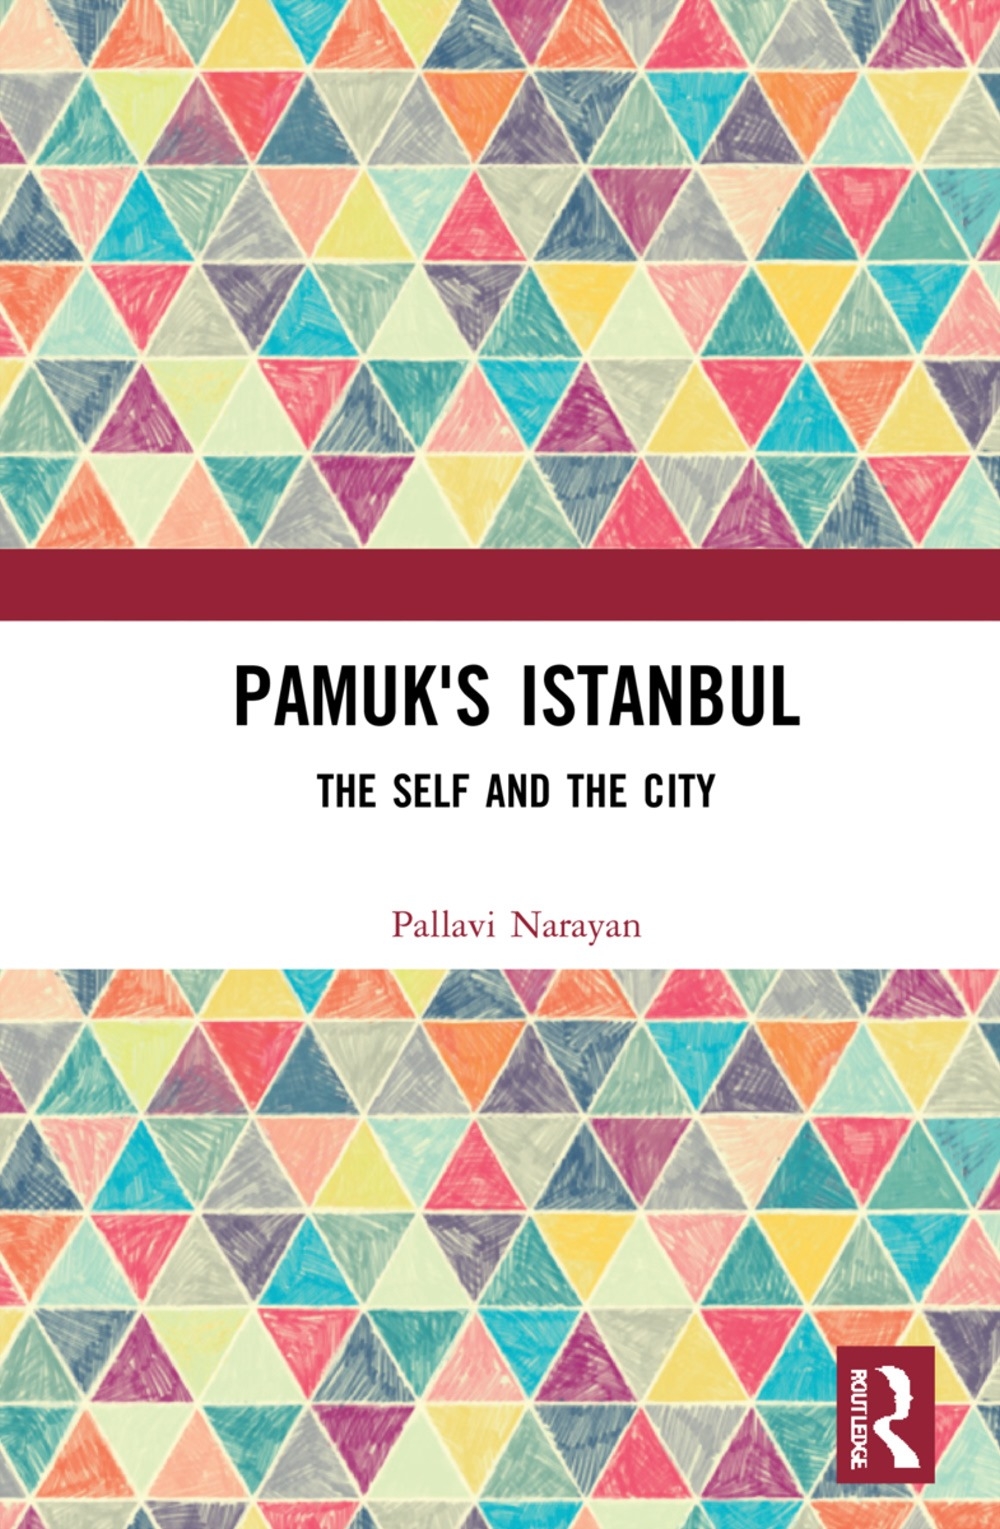 Pamuk’s Istanbul: The Self and the City